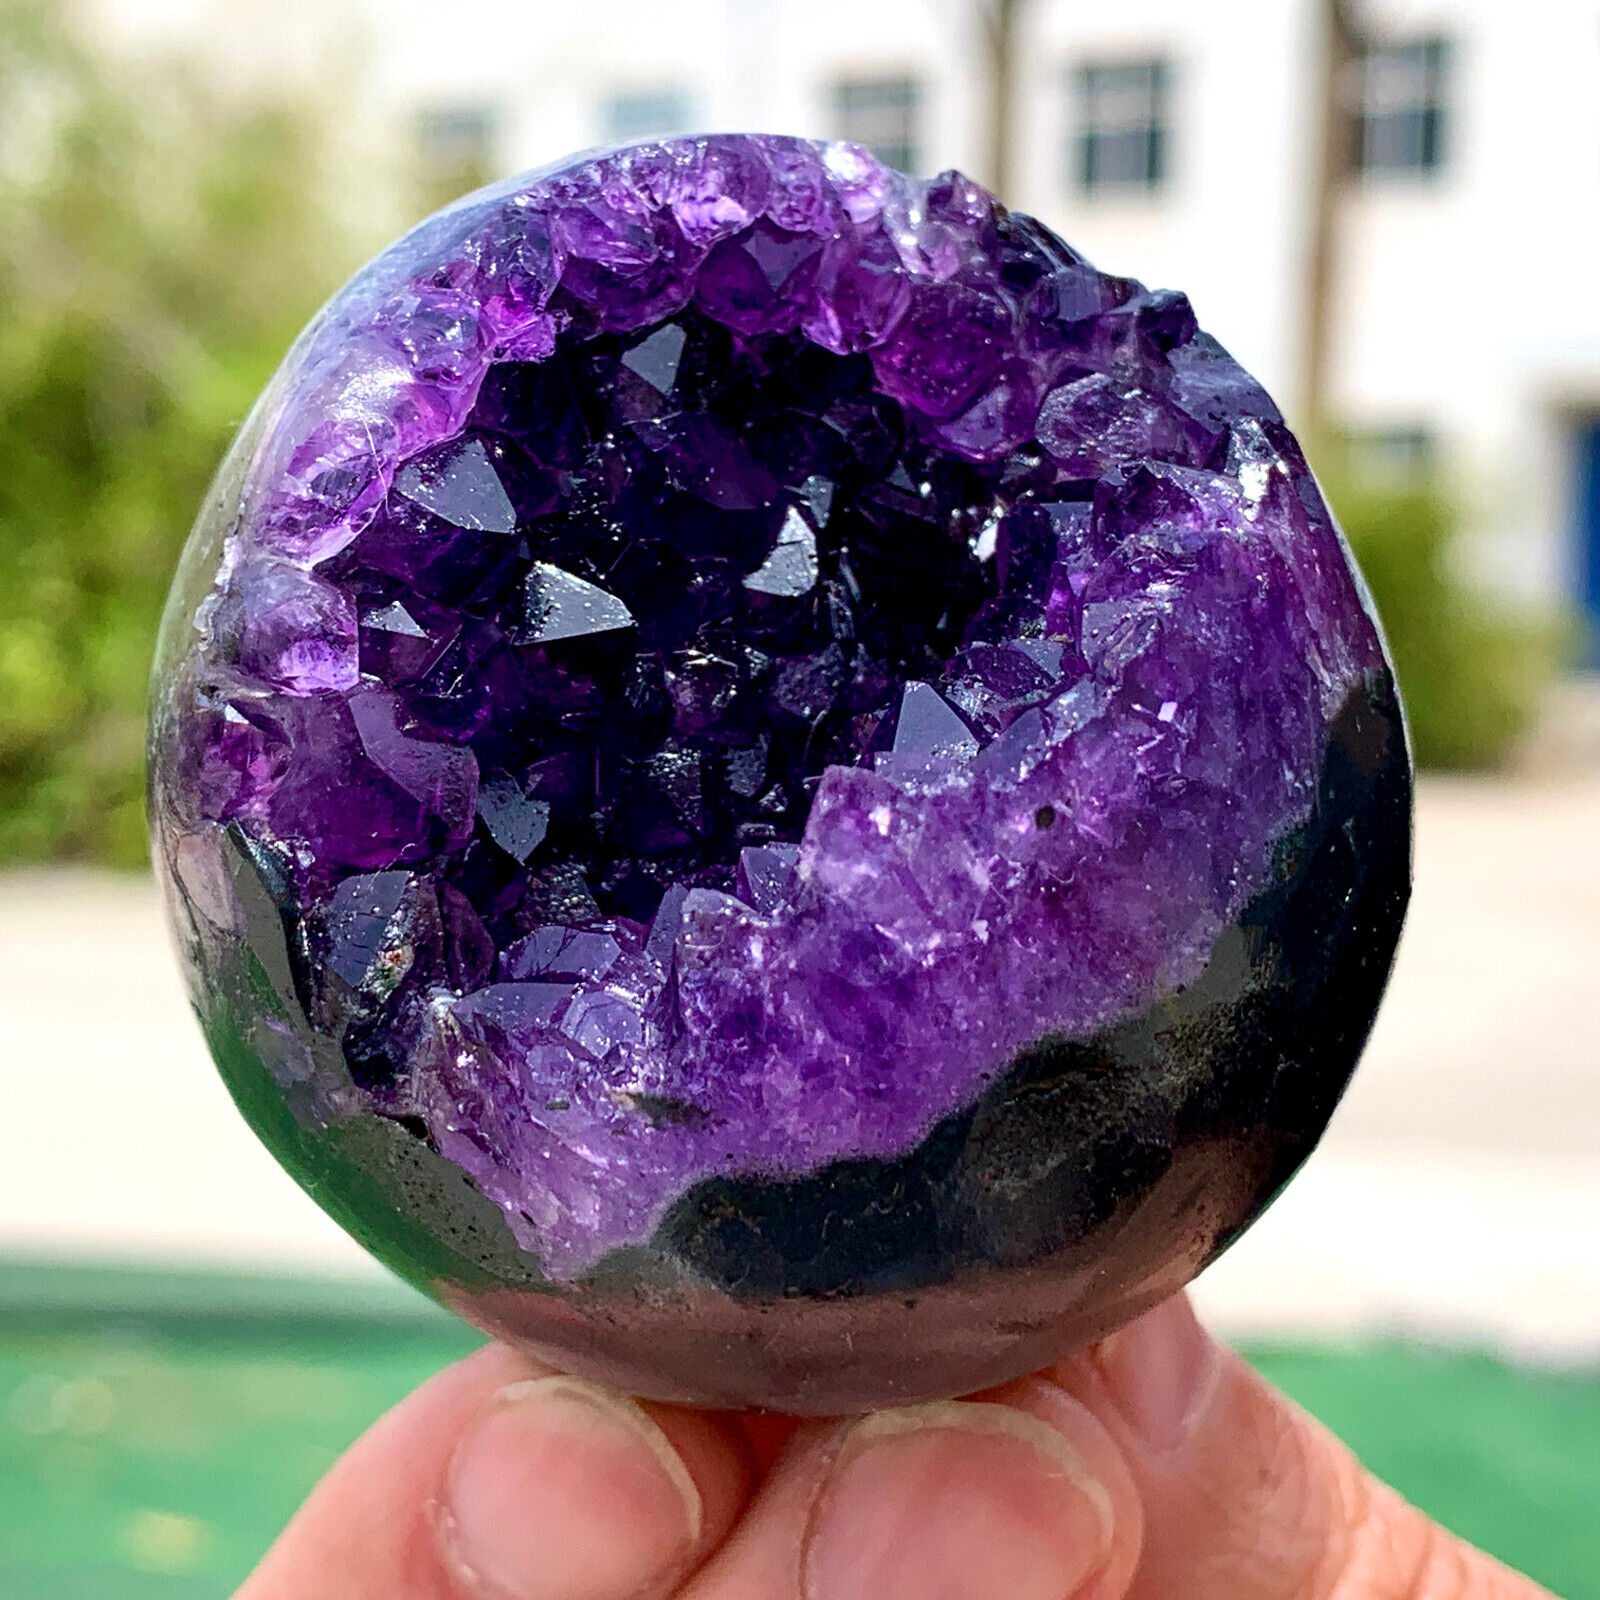 174G Natural quartz crystal amethyst sphere amethyst opens its mouth and smiles